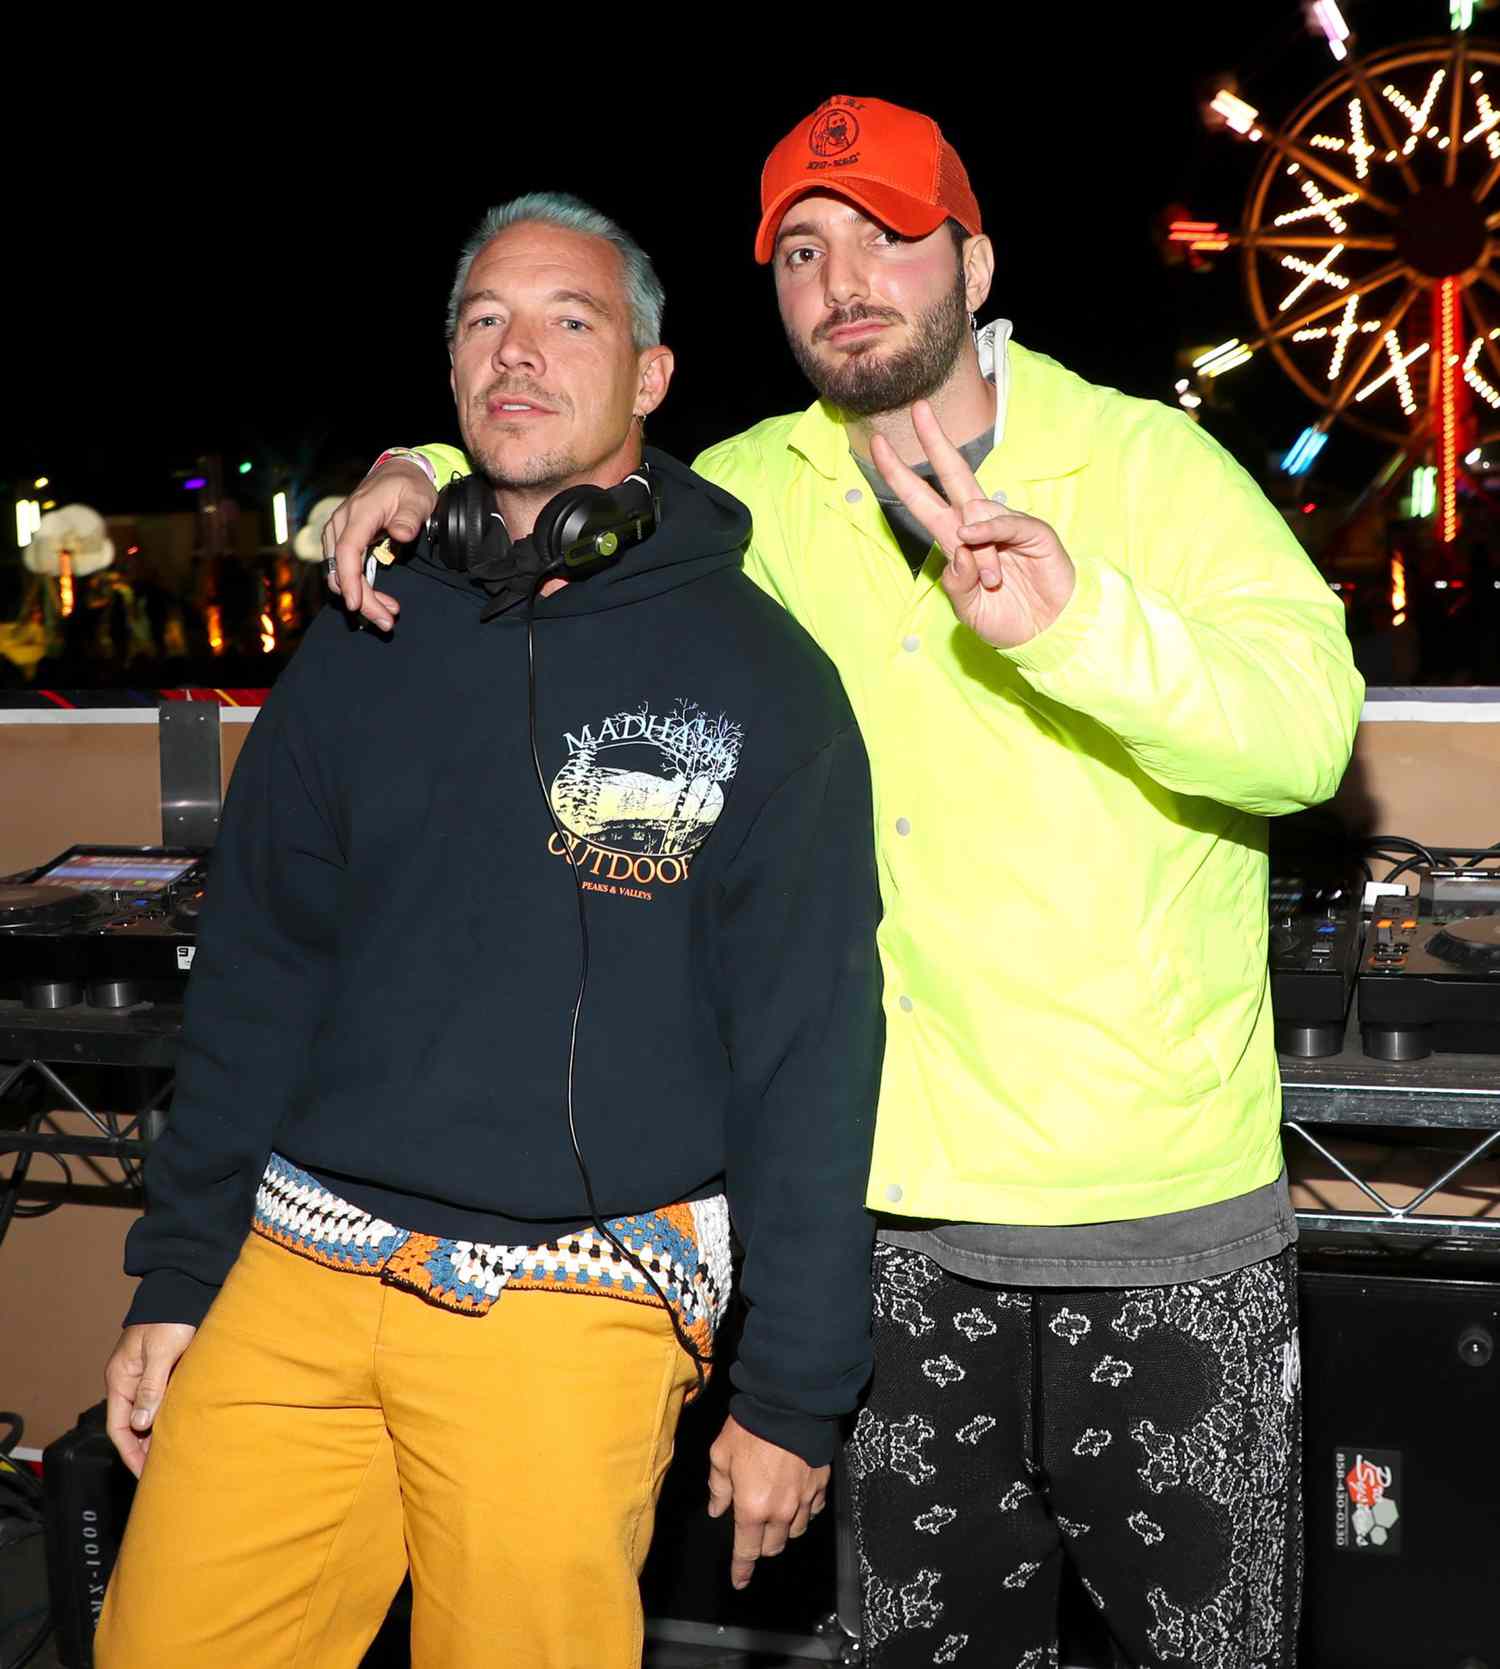 THERMAL, CALIFORNIA - APRIL 16: (L-R) Diplo and Alesso attend Casamigos at Tao Desert Nights presented by Jeeter at Cavallo Ranch on April 16, 2022 in Thermal, California. (Photo by Jerritt Clark/Getty Images for Casamigos Tequila)